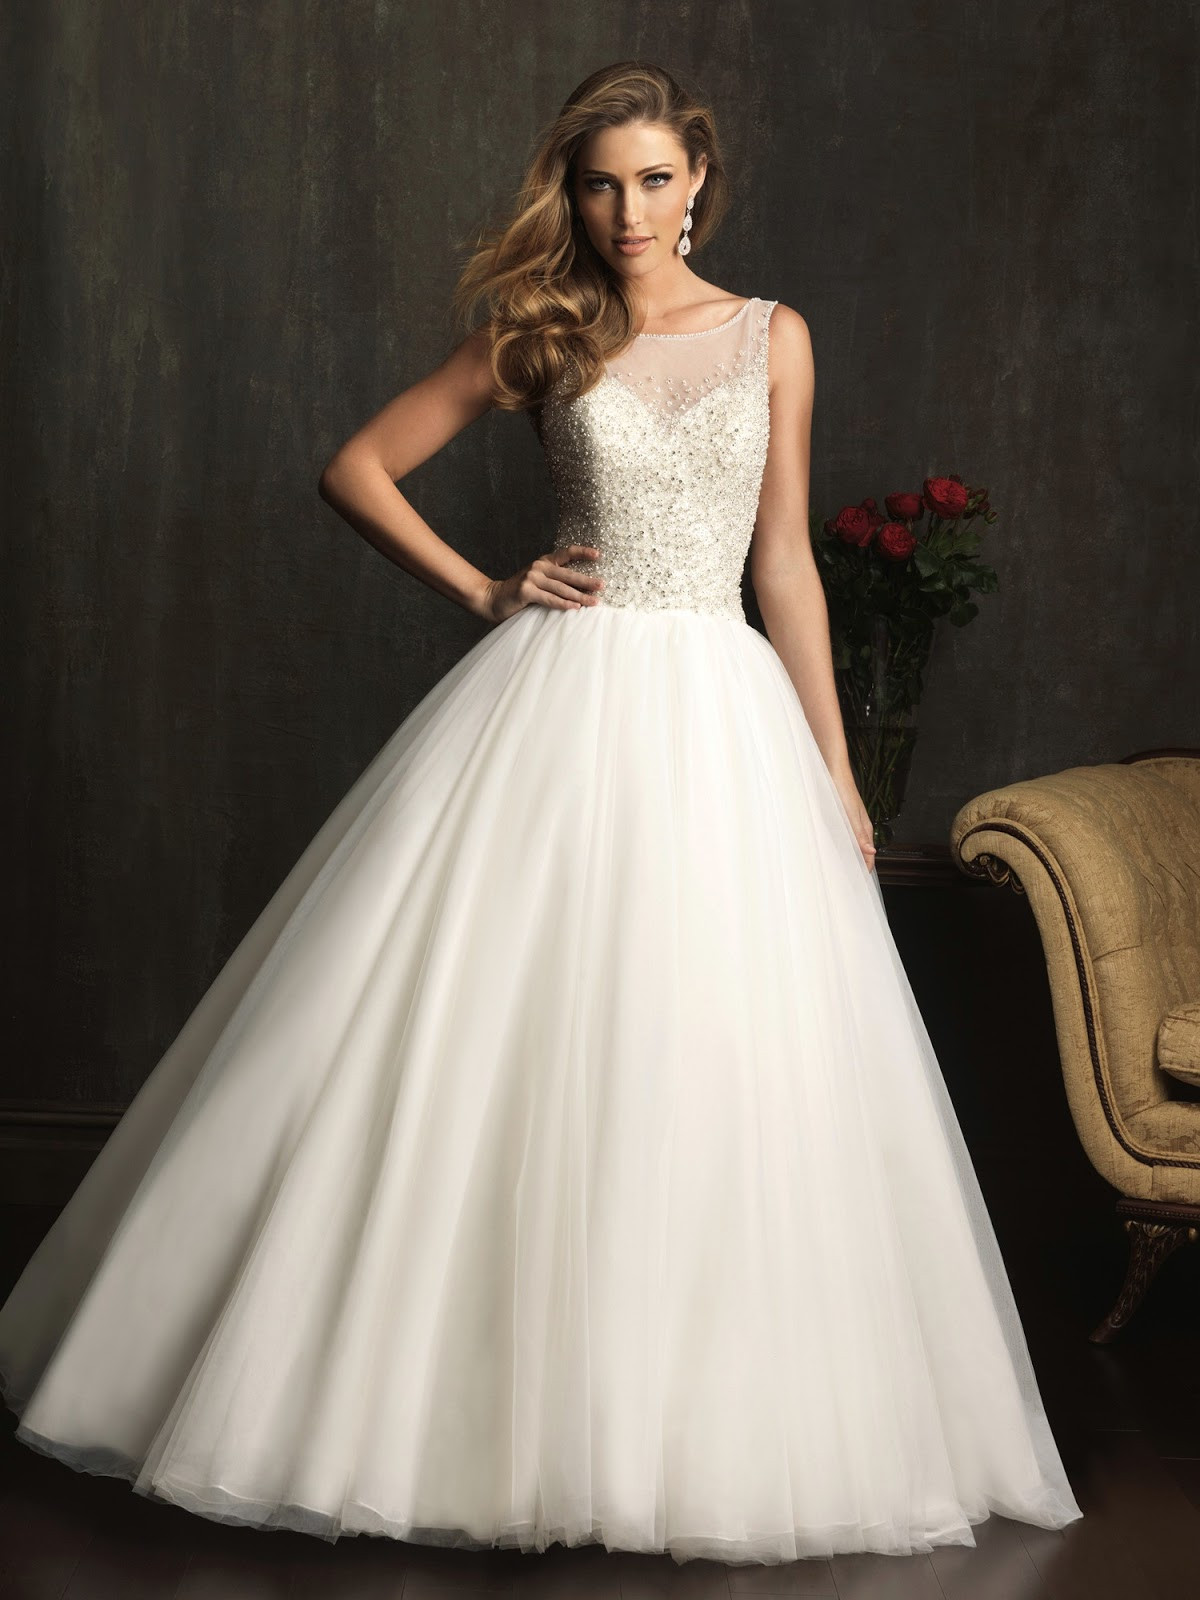 Wedding Ball Gowns
 DressyBridal Allure Wedding Dresses Fall 2013 Collection